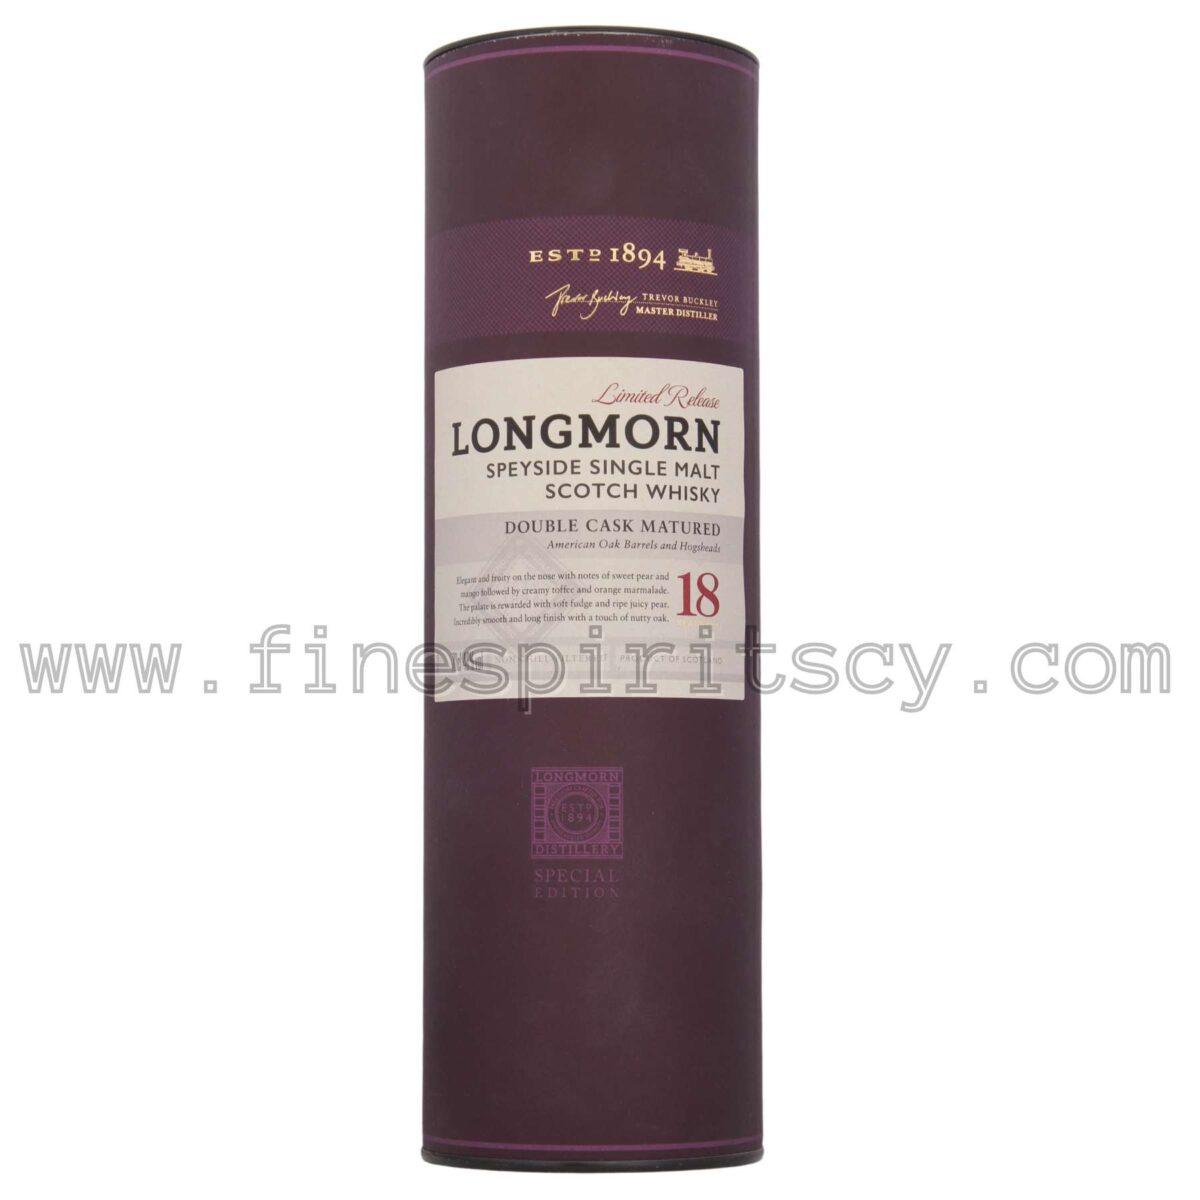 Longmorn 18 Year Old Scotch Scotland Whisky Order Online Price Cyprus Europe CY Buy